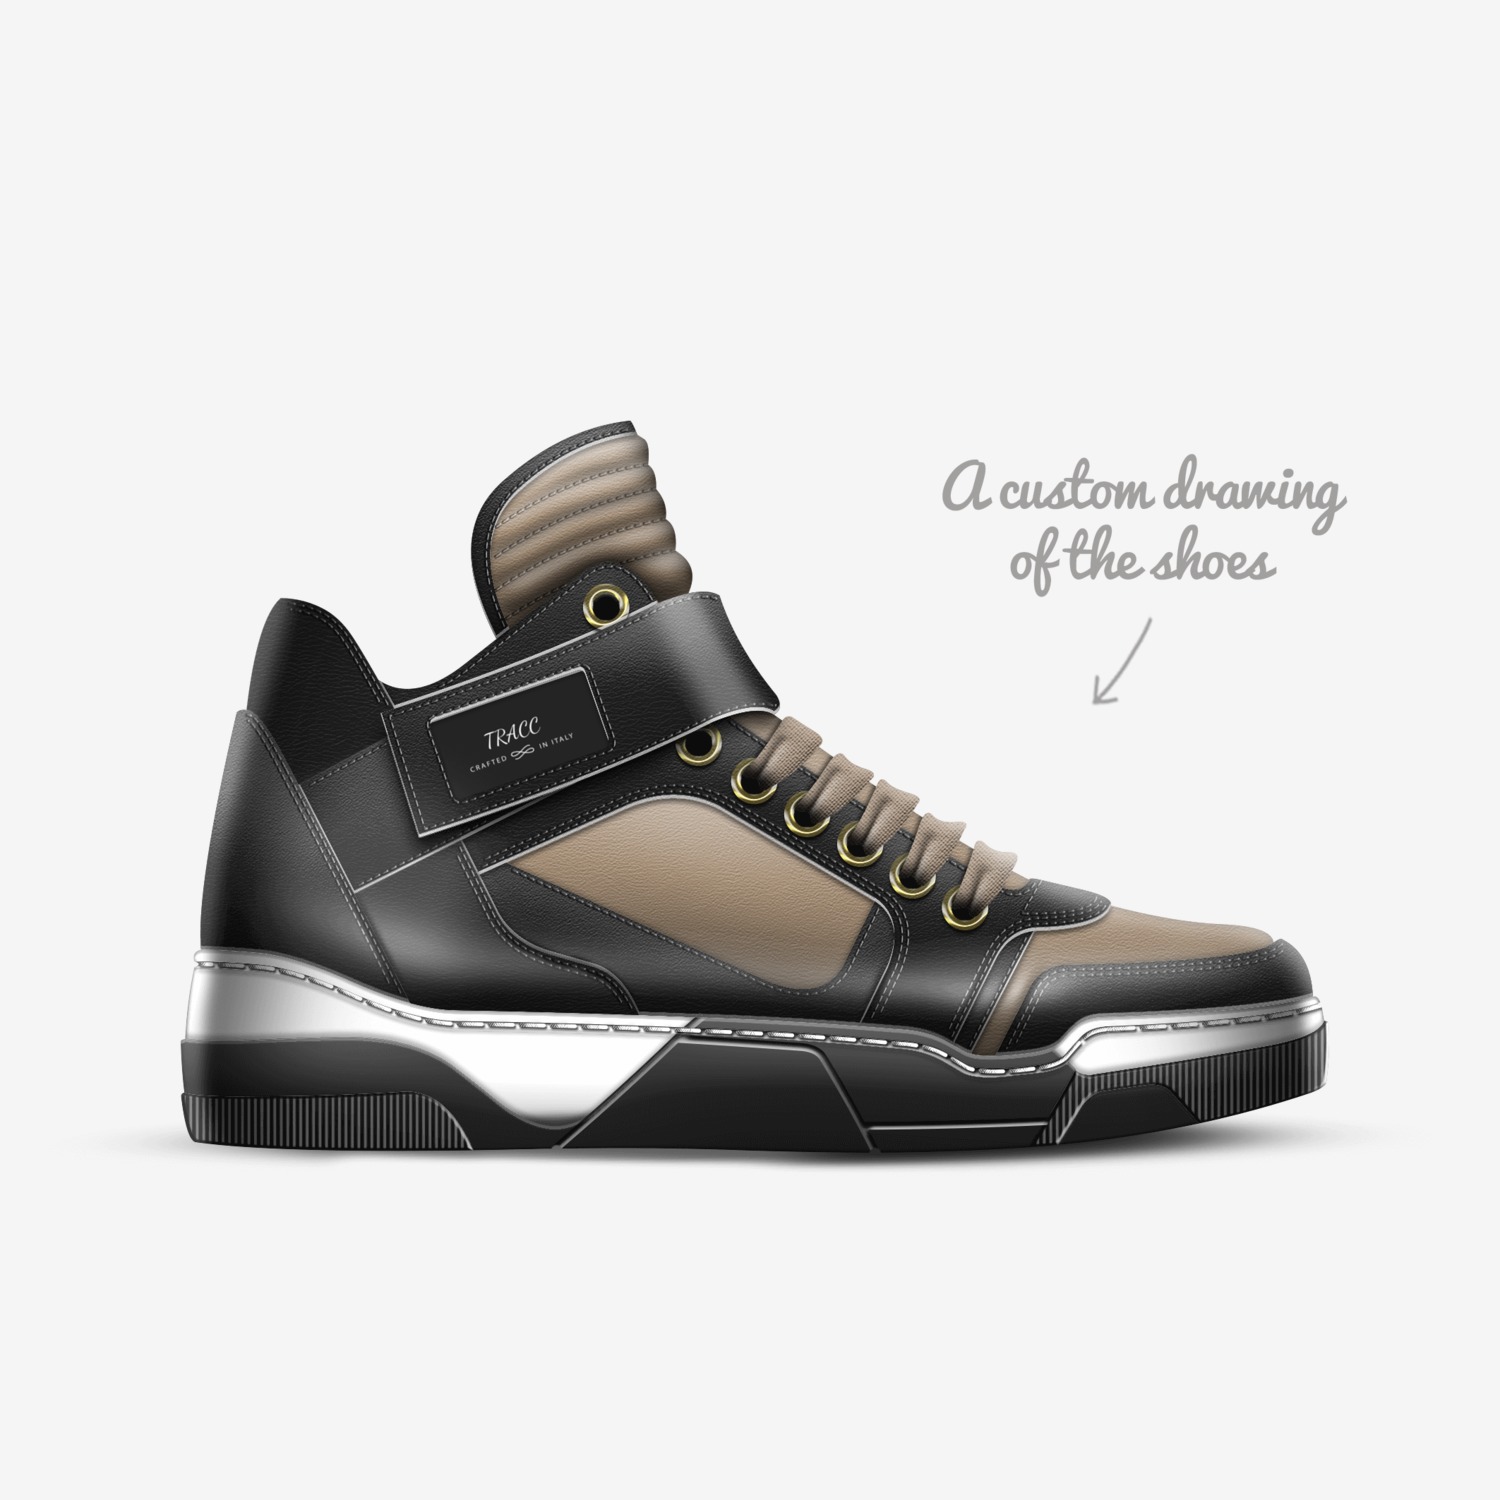 TRACC | A Custom Shoe concept by Steven Smith